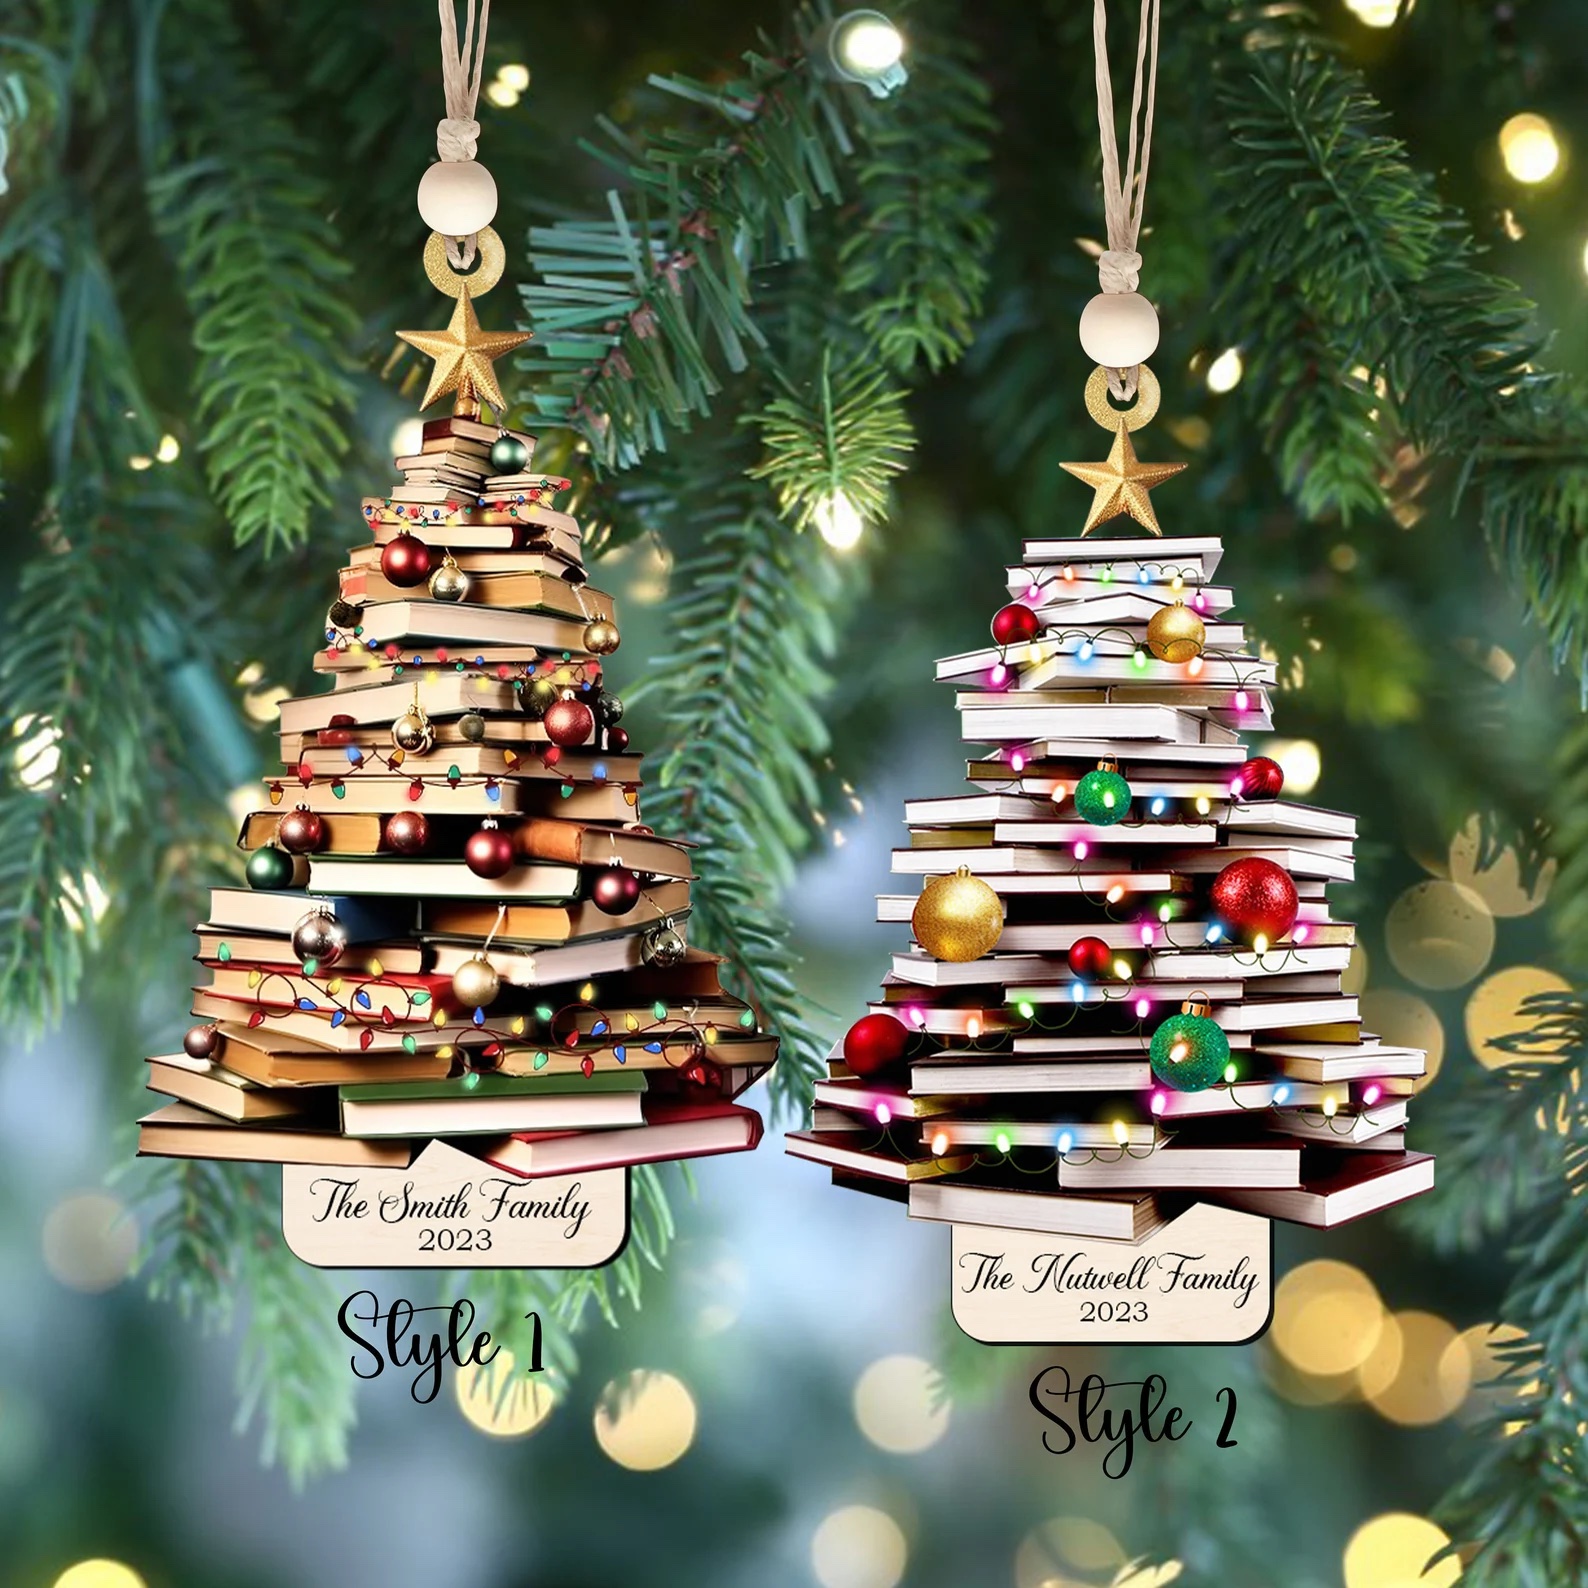 a photo of two ornaments made out of the images of Christmas trees made out of books